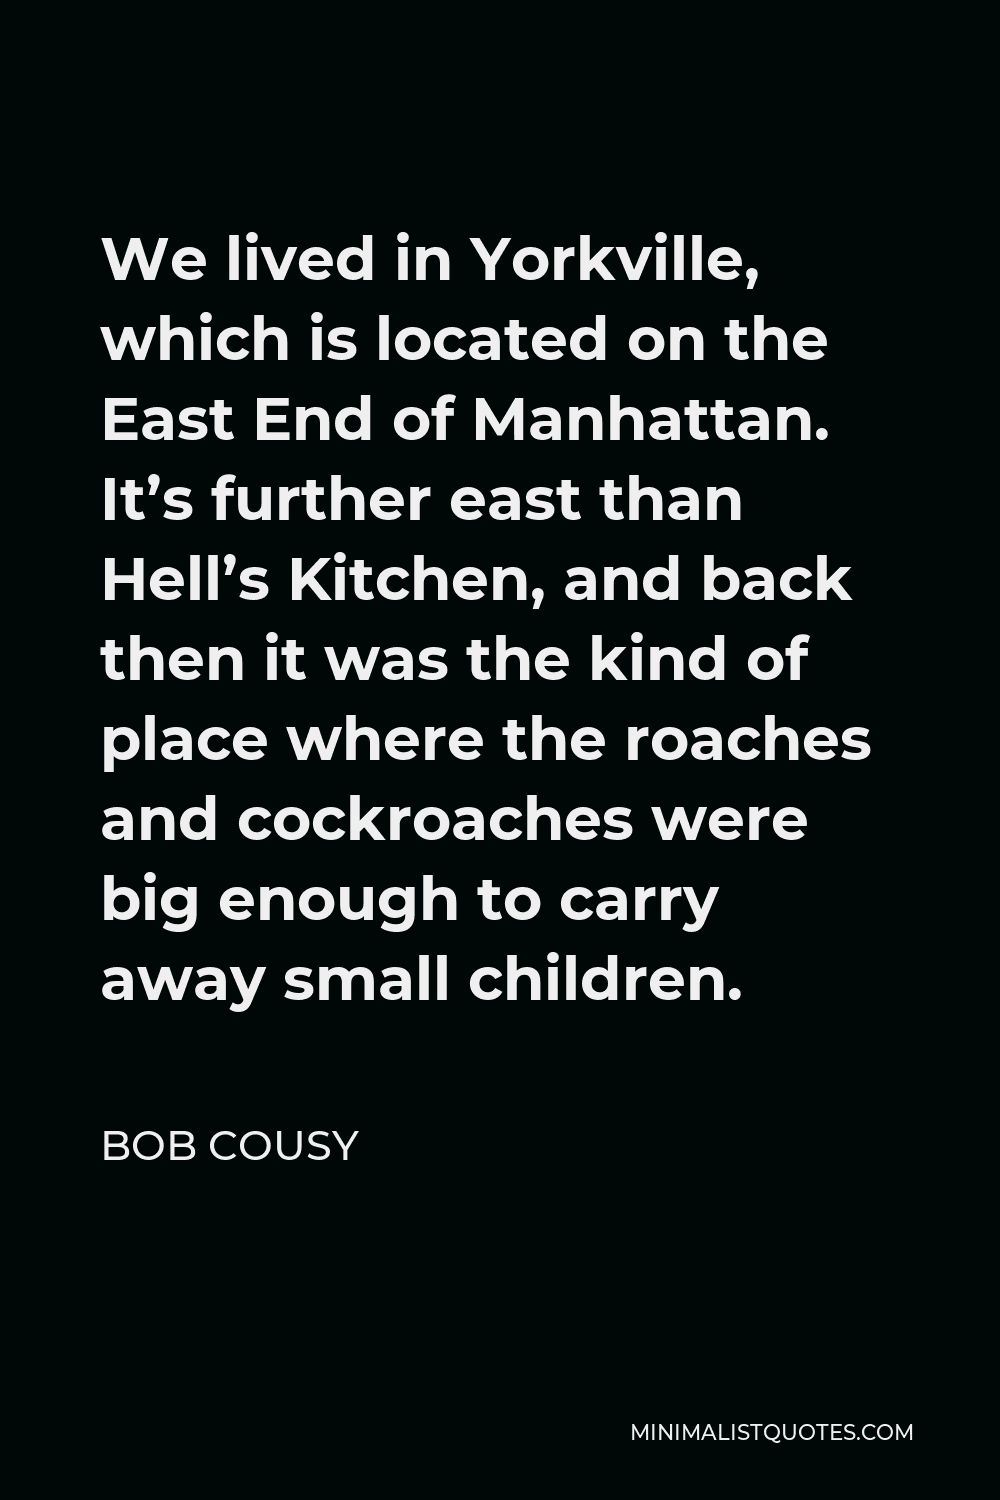 Bob Cousy Quote - We lived in Yorkville, which is located on the East End of Manhattan. It’s further east than Hell’s Kitchen, and back then it was the kind of place where the roaches and cockroaches were big enough to carry away small children.